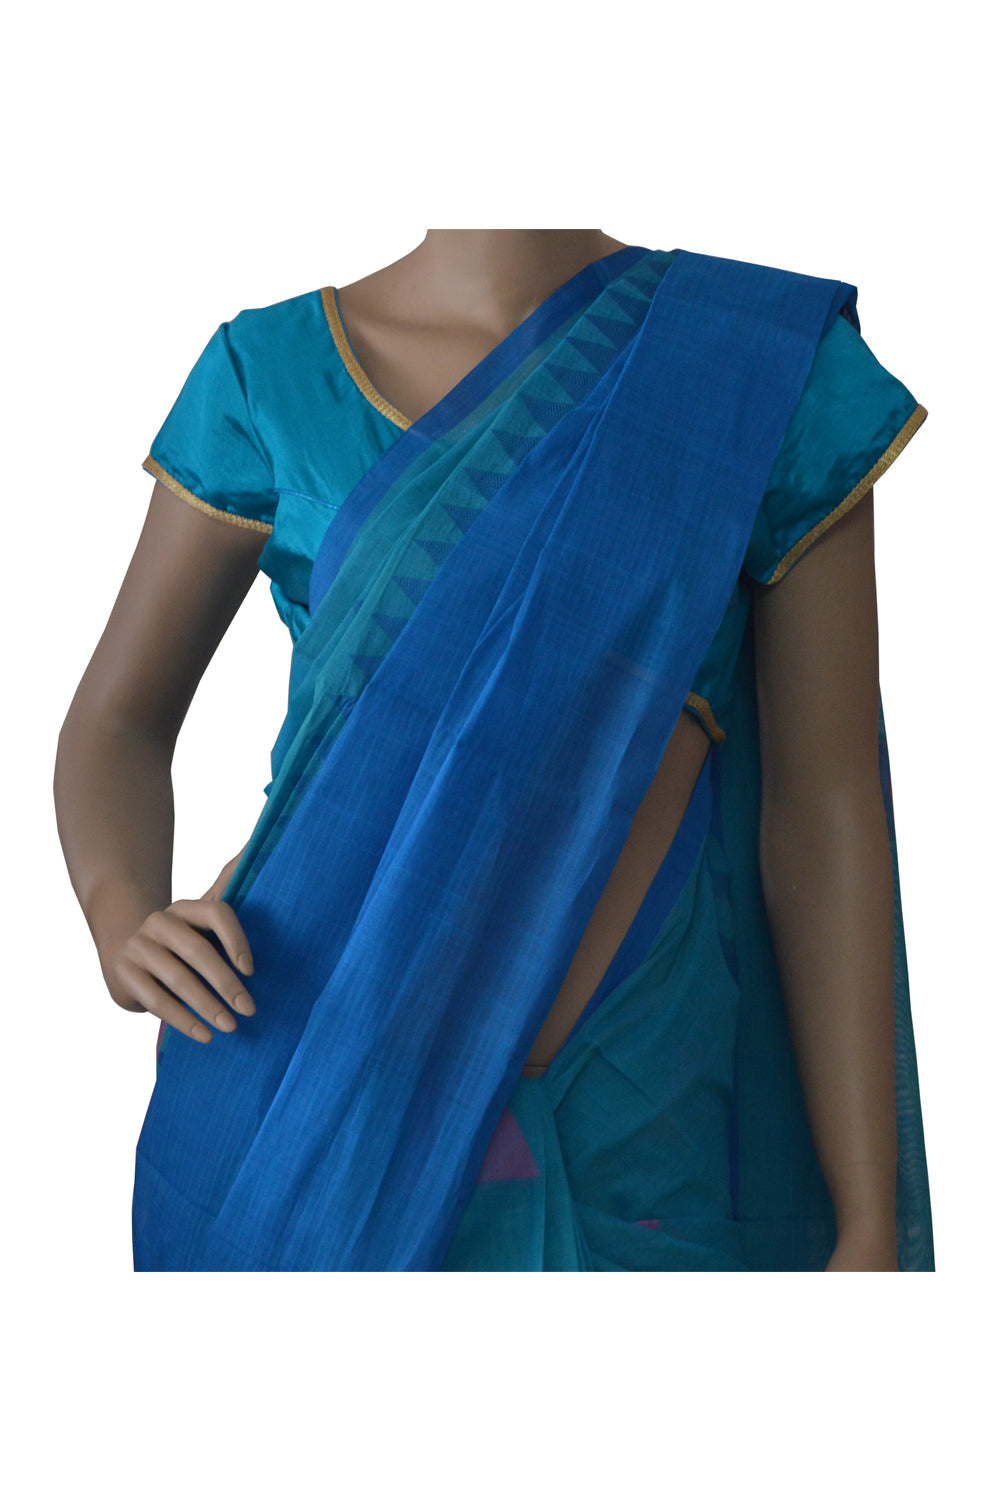 Southloom™ Premium Handloom South Cotton Blue Saree With Temple Design